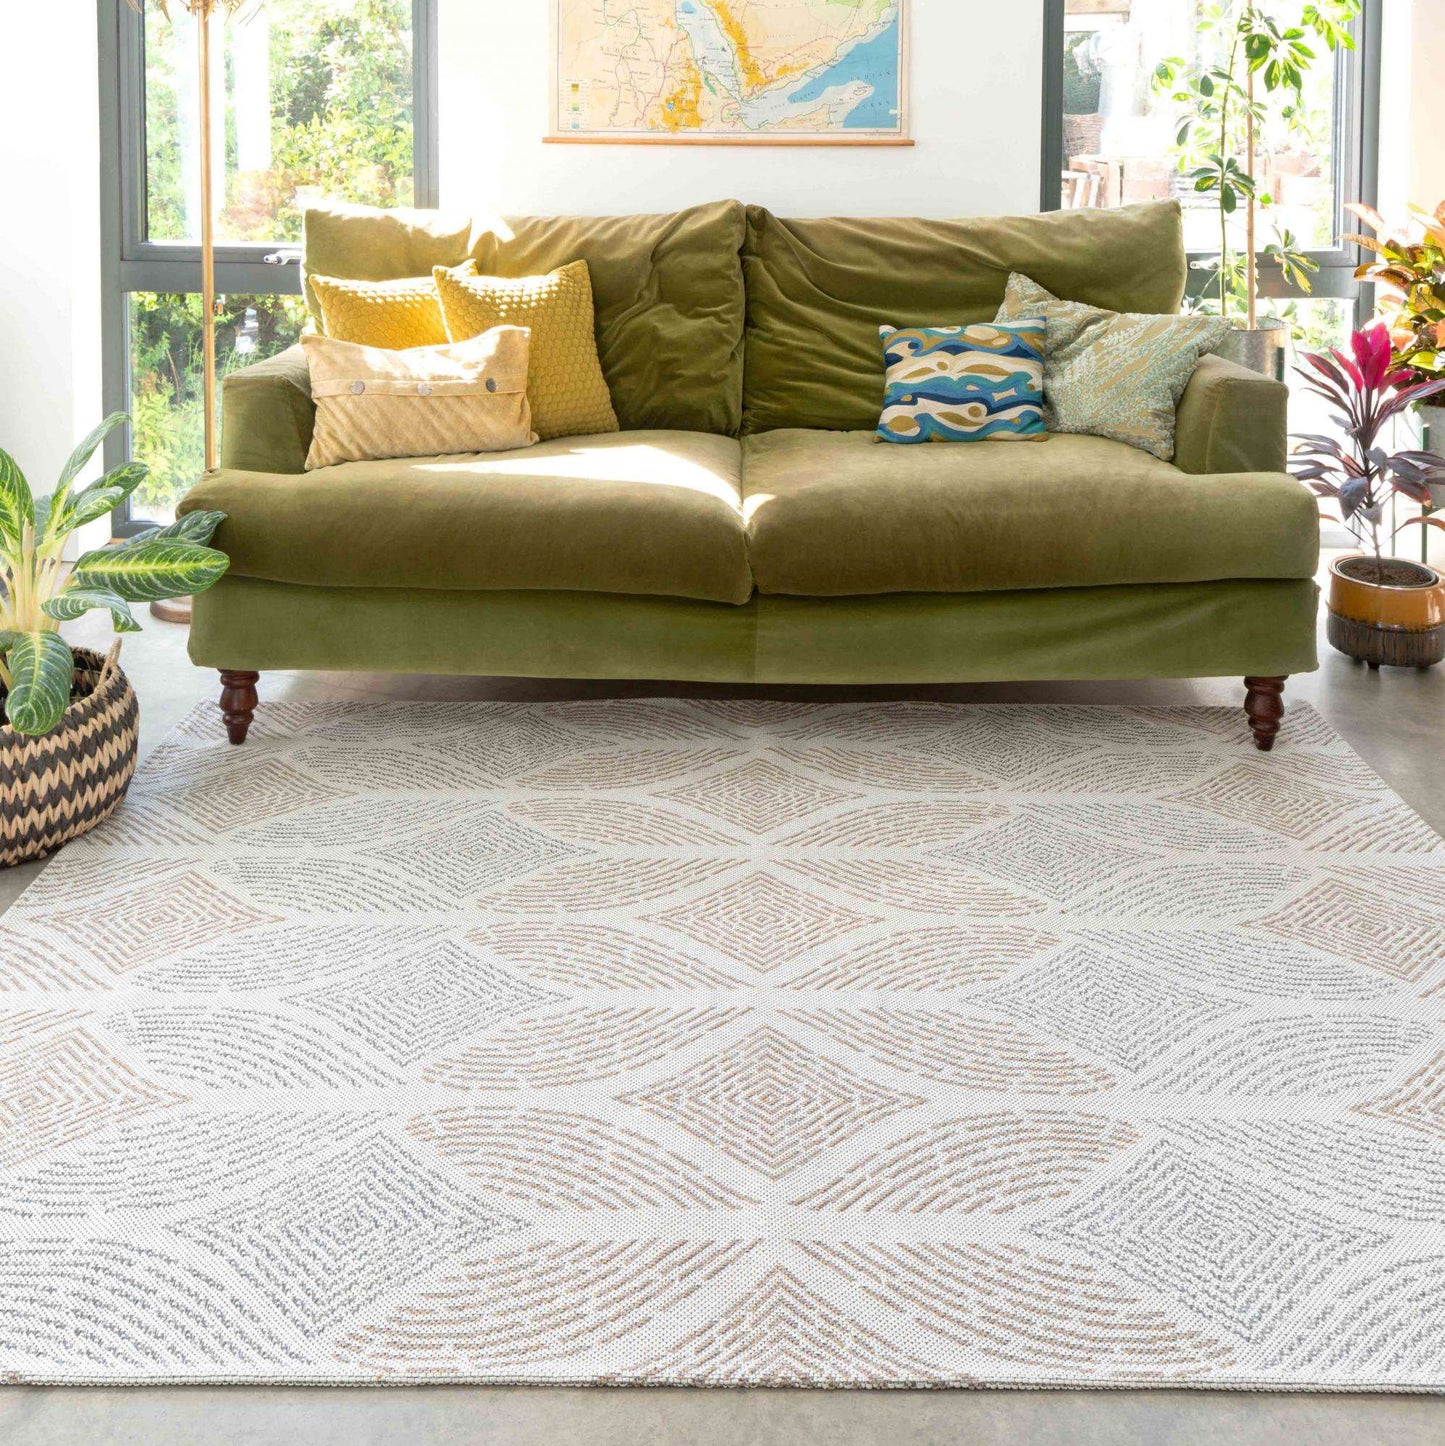 Moroccan Tile Faded Beige Woven Sustainable Recycled Cotton Rug